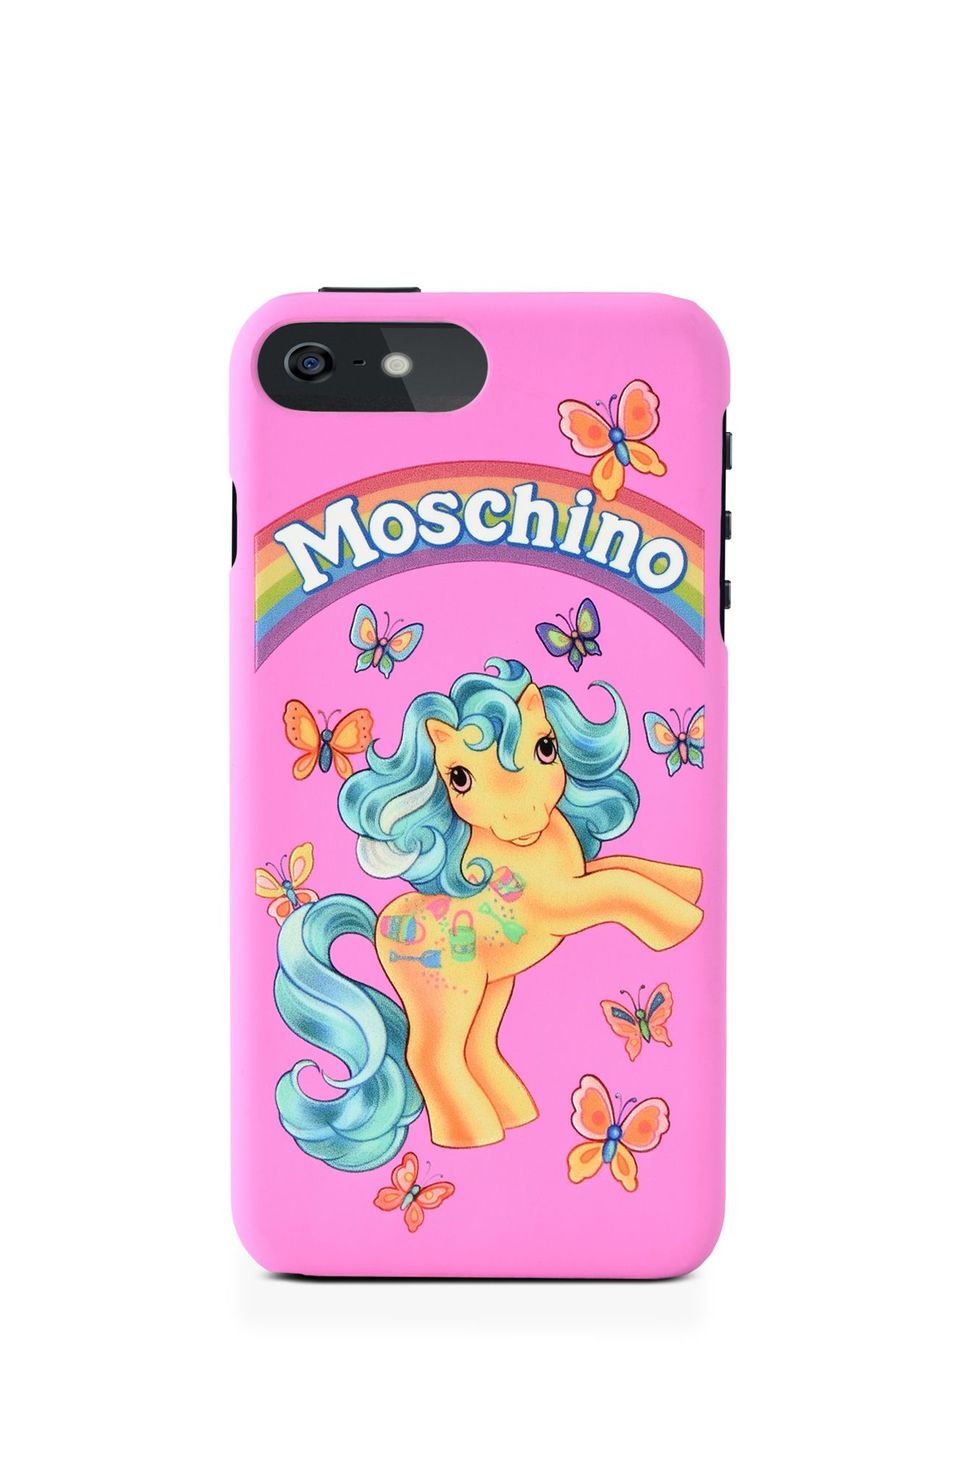 Mobile phone case, Pink, Cartoon, Mobile phone accessories, Technology, Fictional character, 